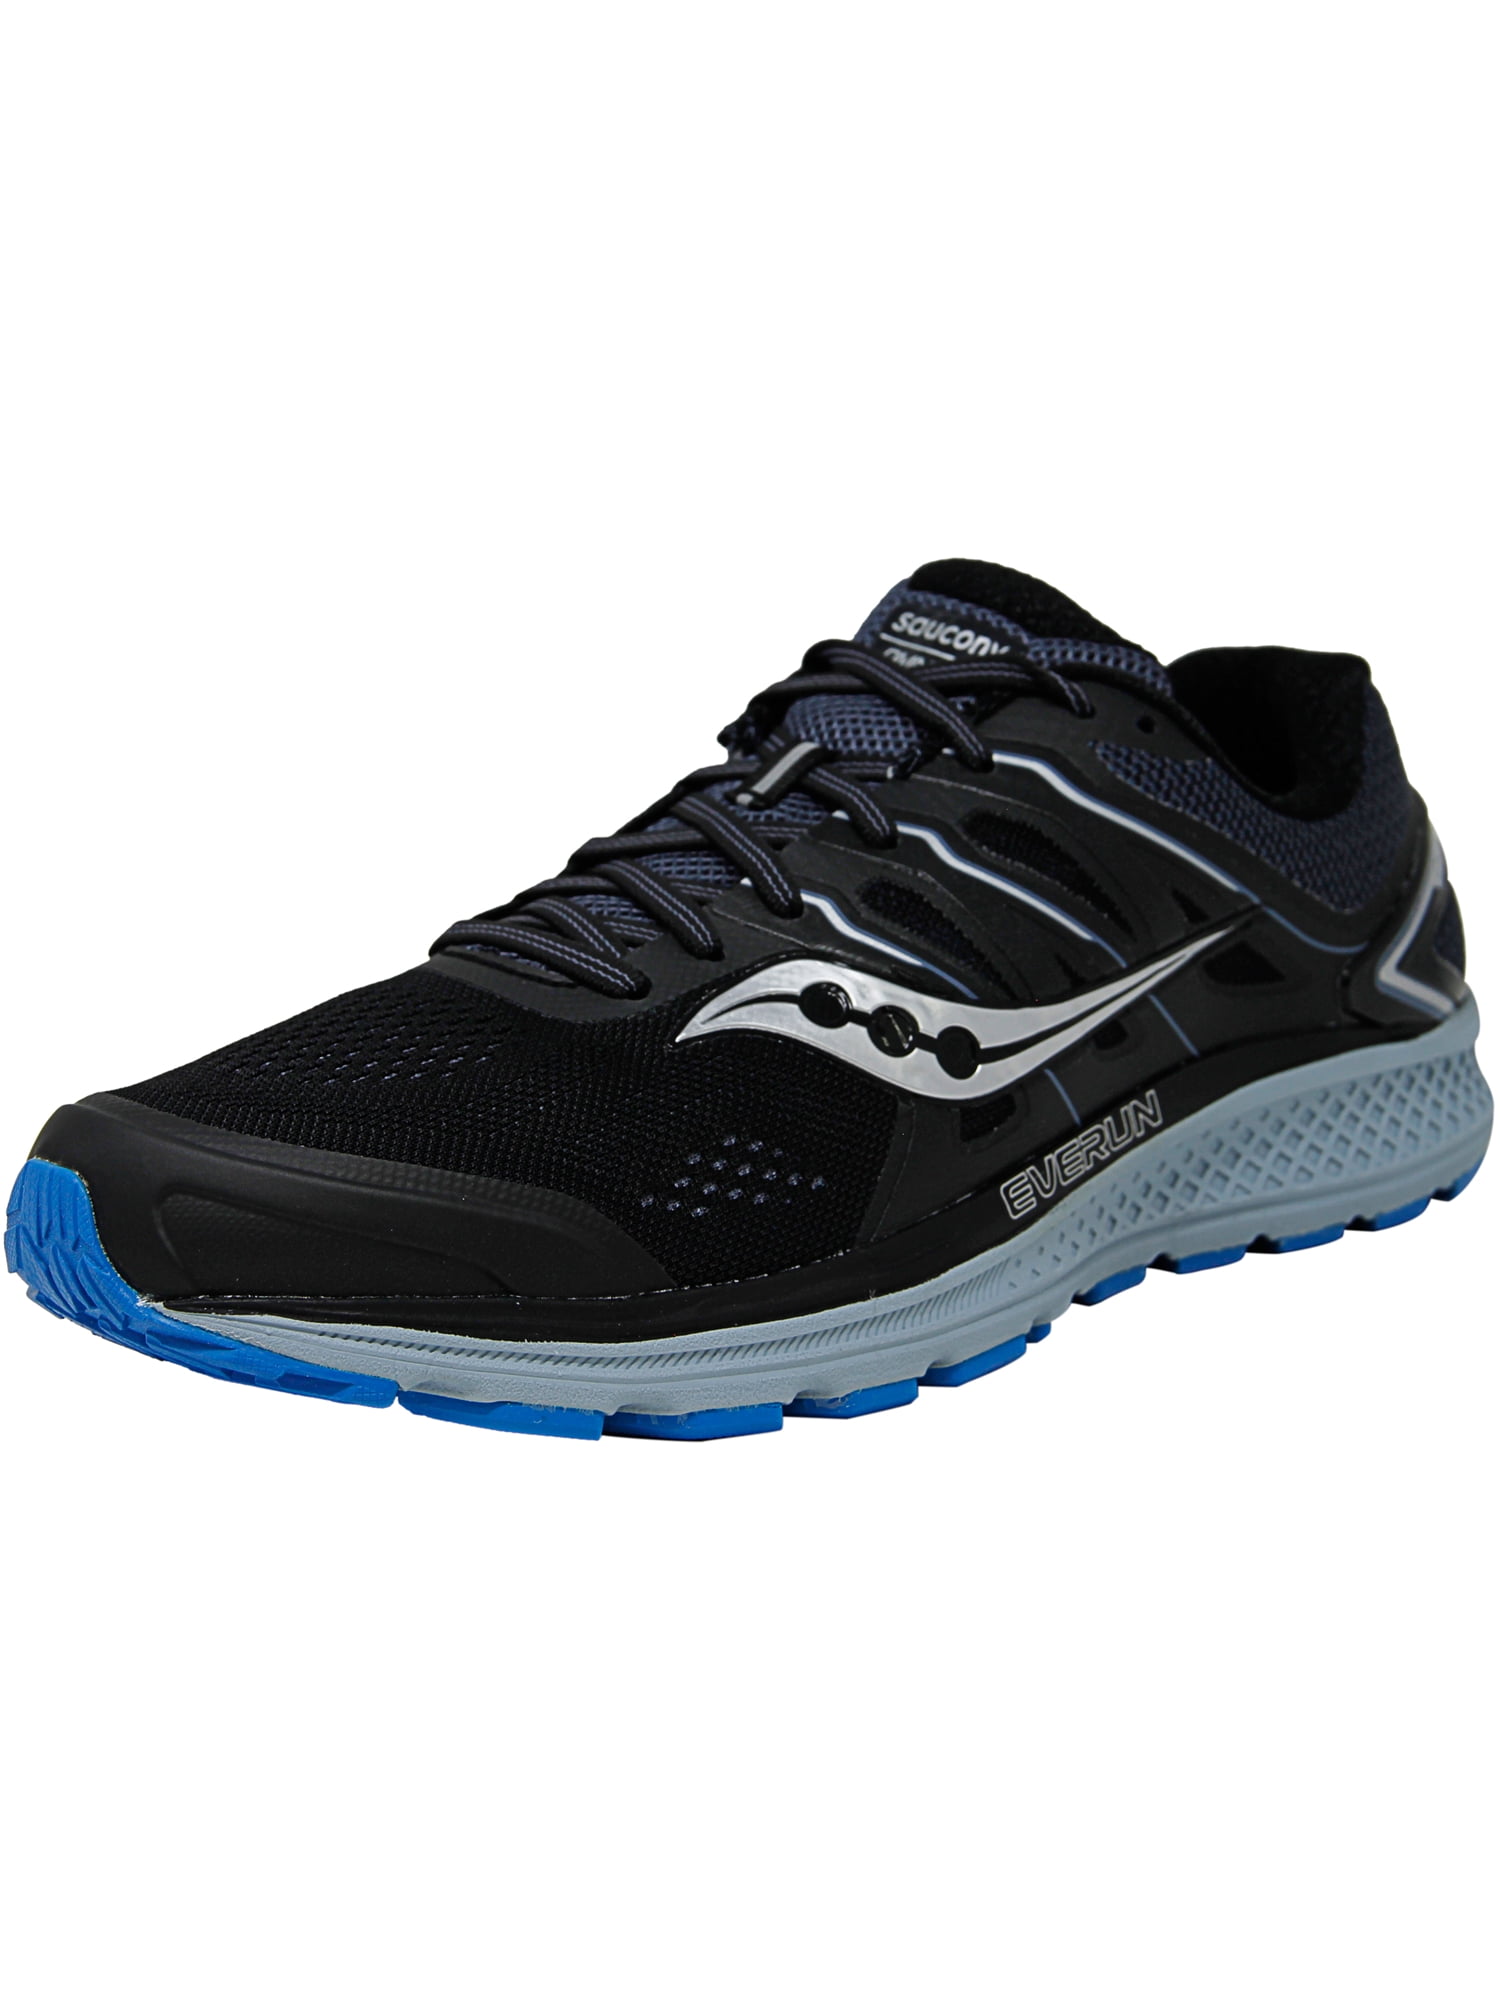 saucony running shoes omni 16